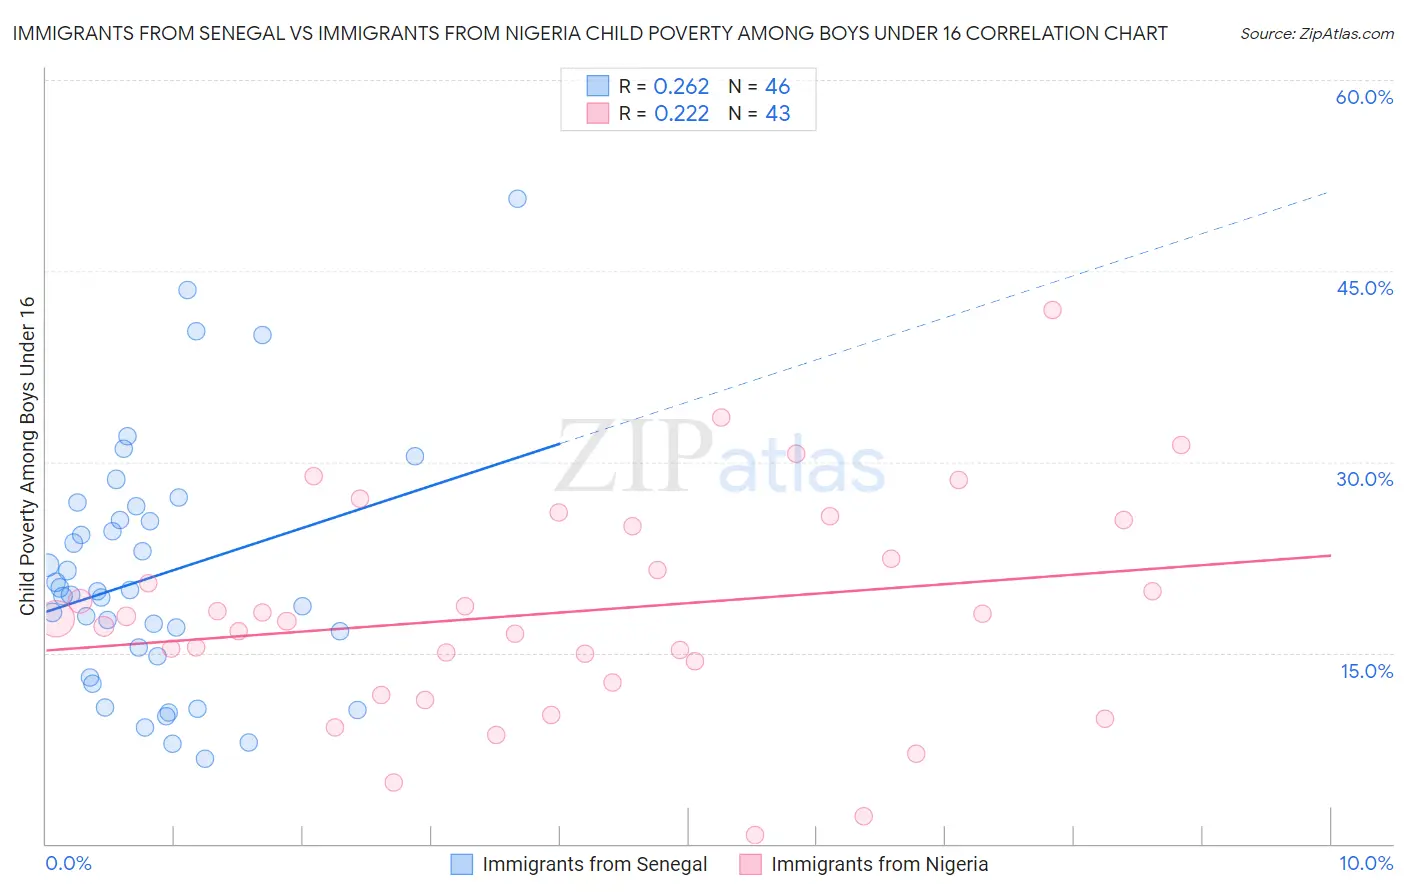 Immigrants from Senegal vs Immigrants from Nigeria Child Poverty Among Boys Under 16